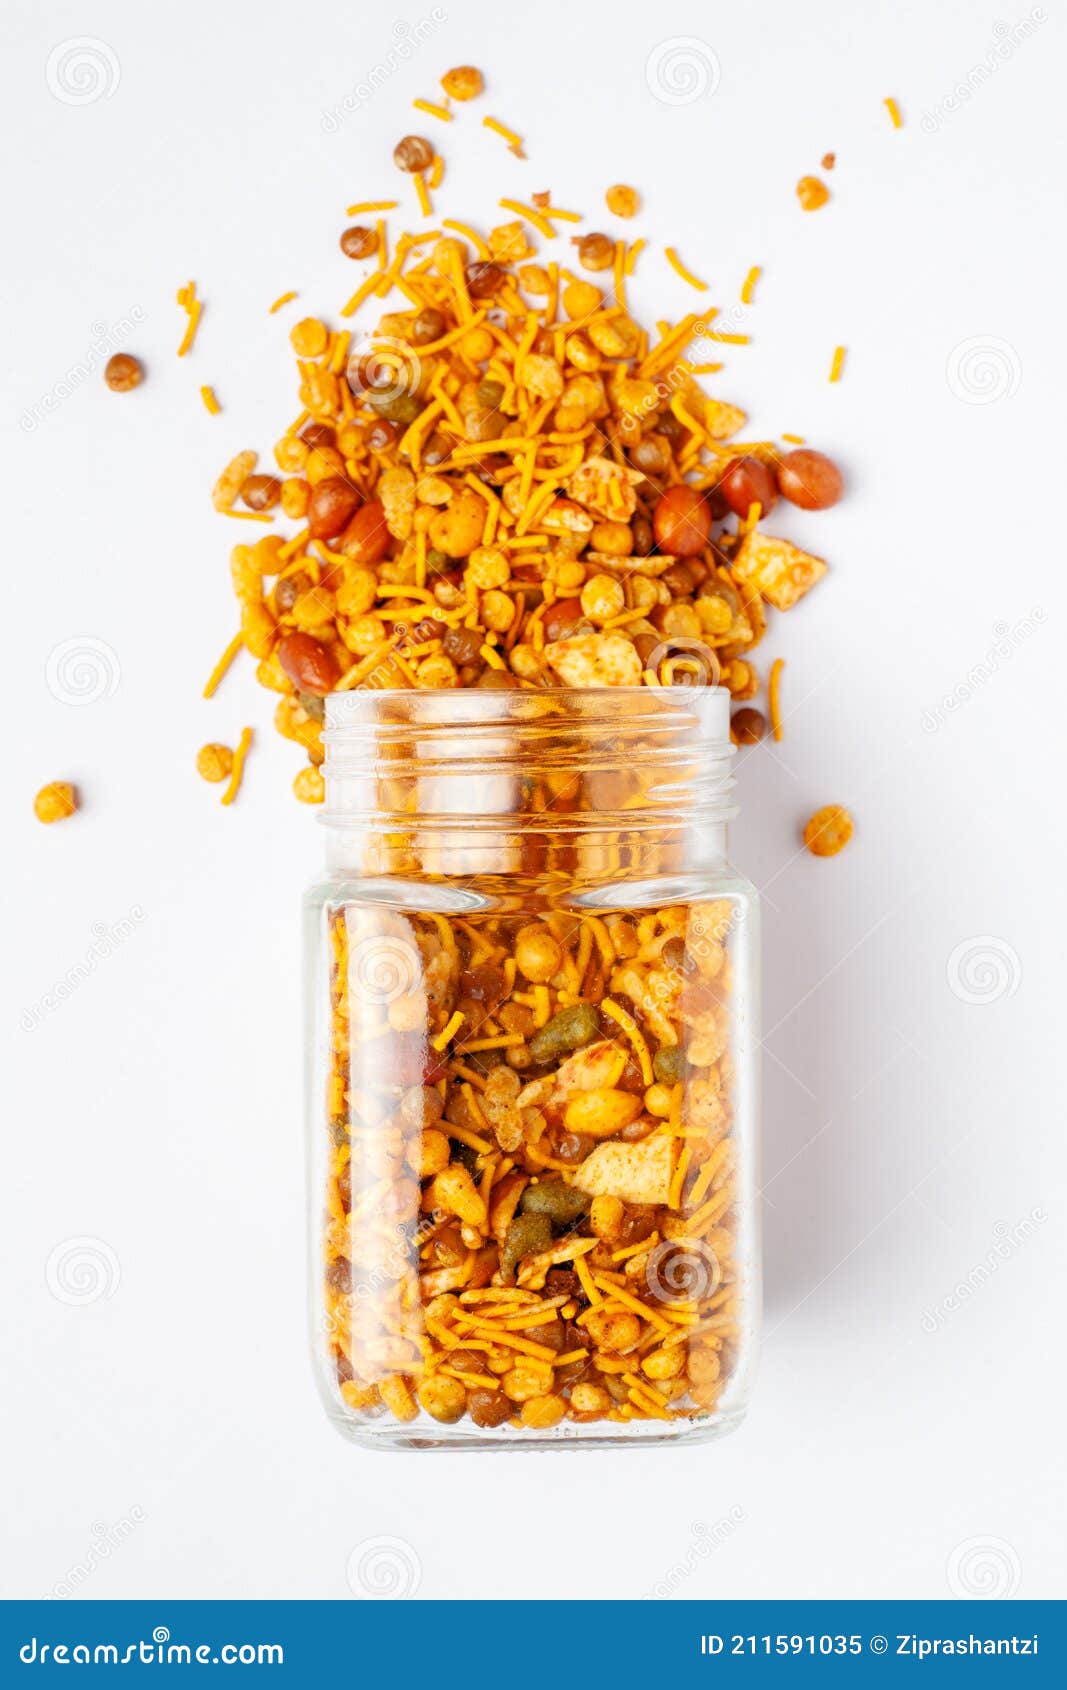 hot spicy nav ratan snacks spilled out and in a glass jar, made with red chili, peanuts, corn flakes.